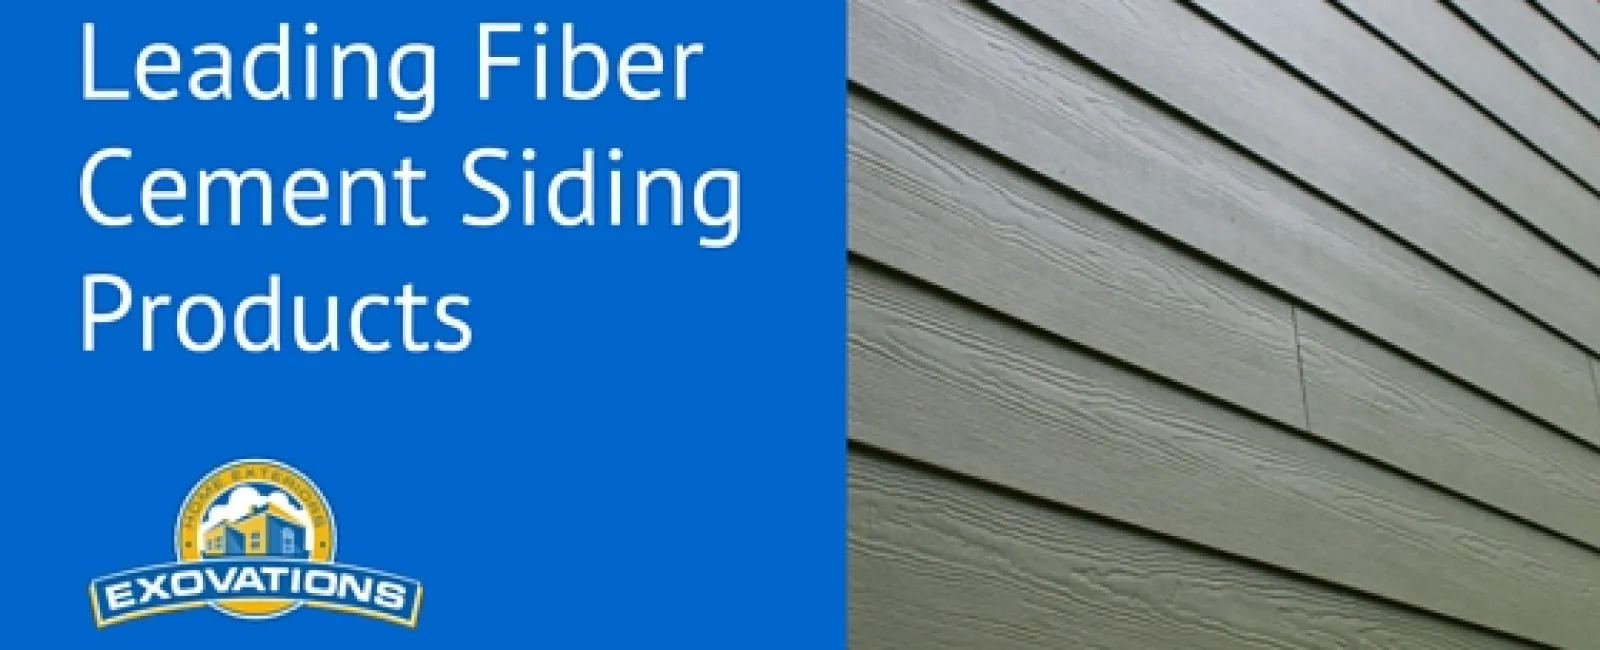 WHAT ARE THE DIFFERENCES BETWEEN CERTAINTEED AND JAMES HARDIE FIBER CEMENT SIDING PRODUCTS?